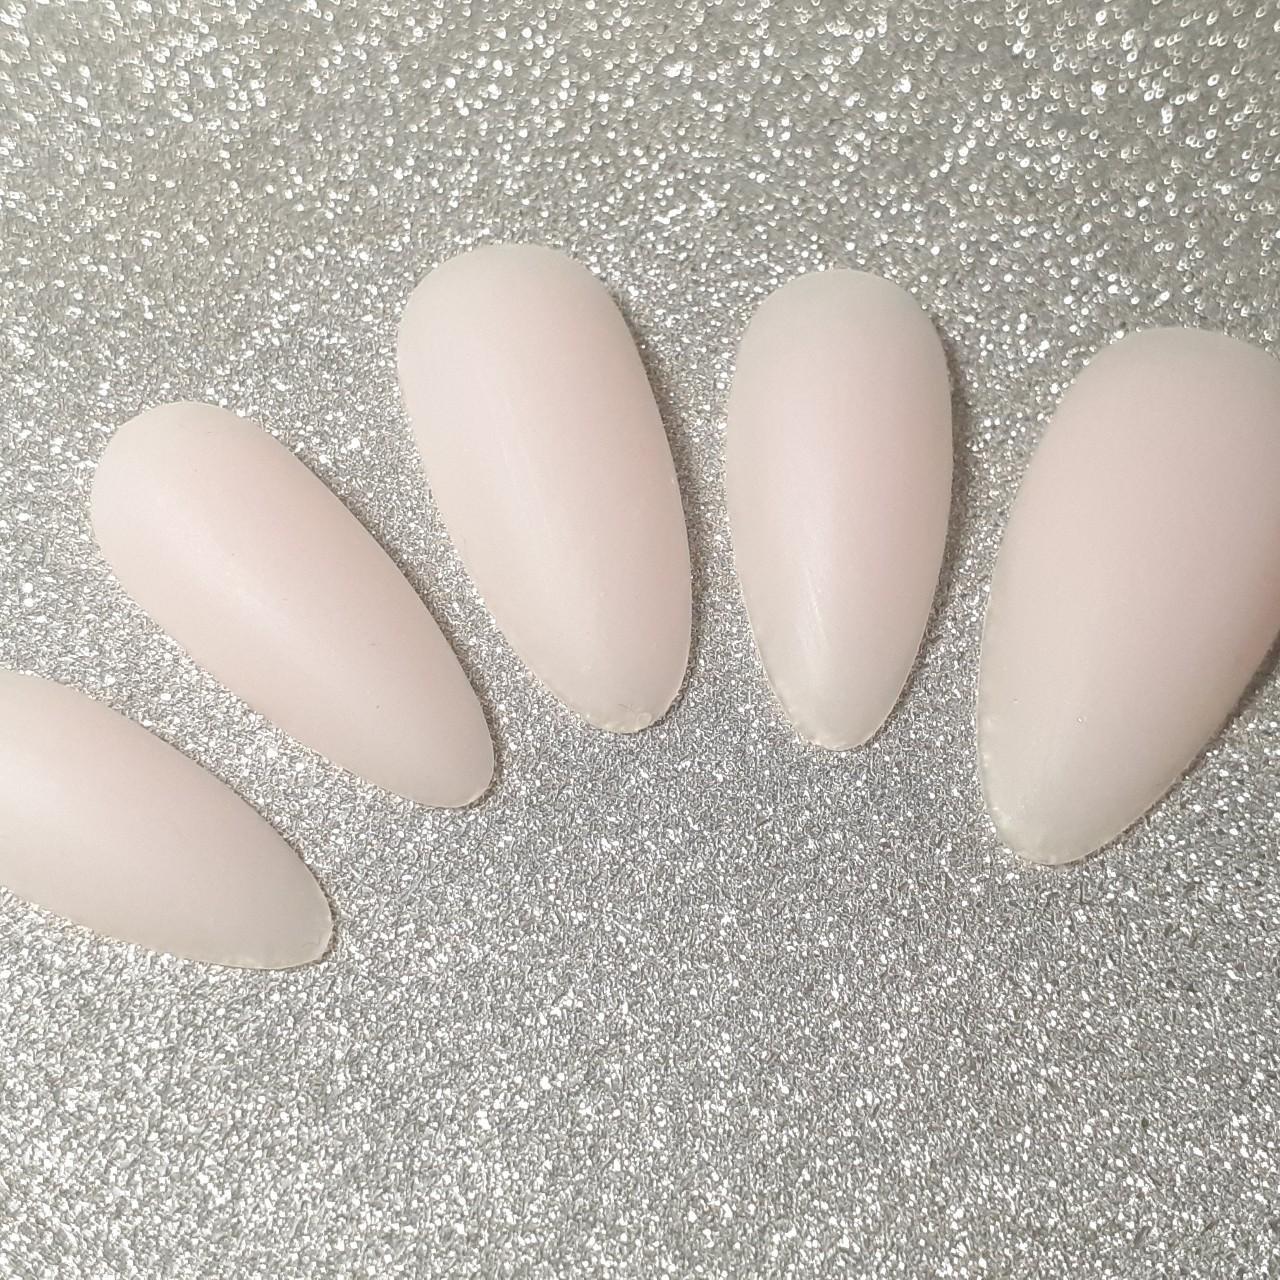 20 piece sheer pink almond nails 10 sizes, 2 of each - Depop